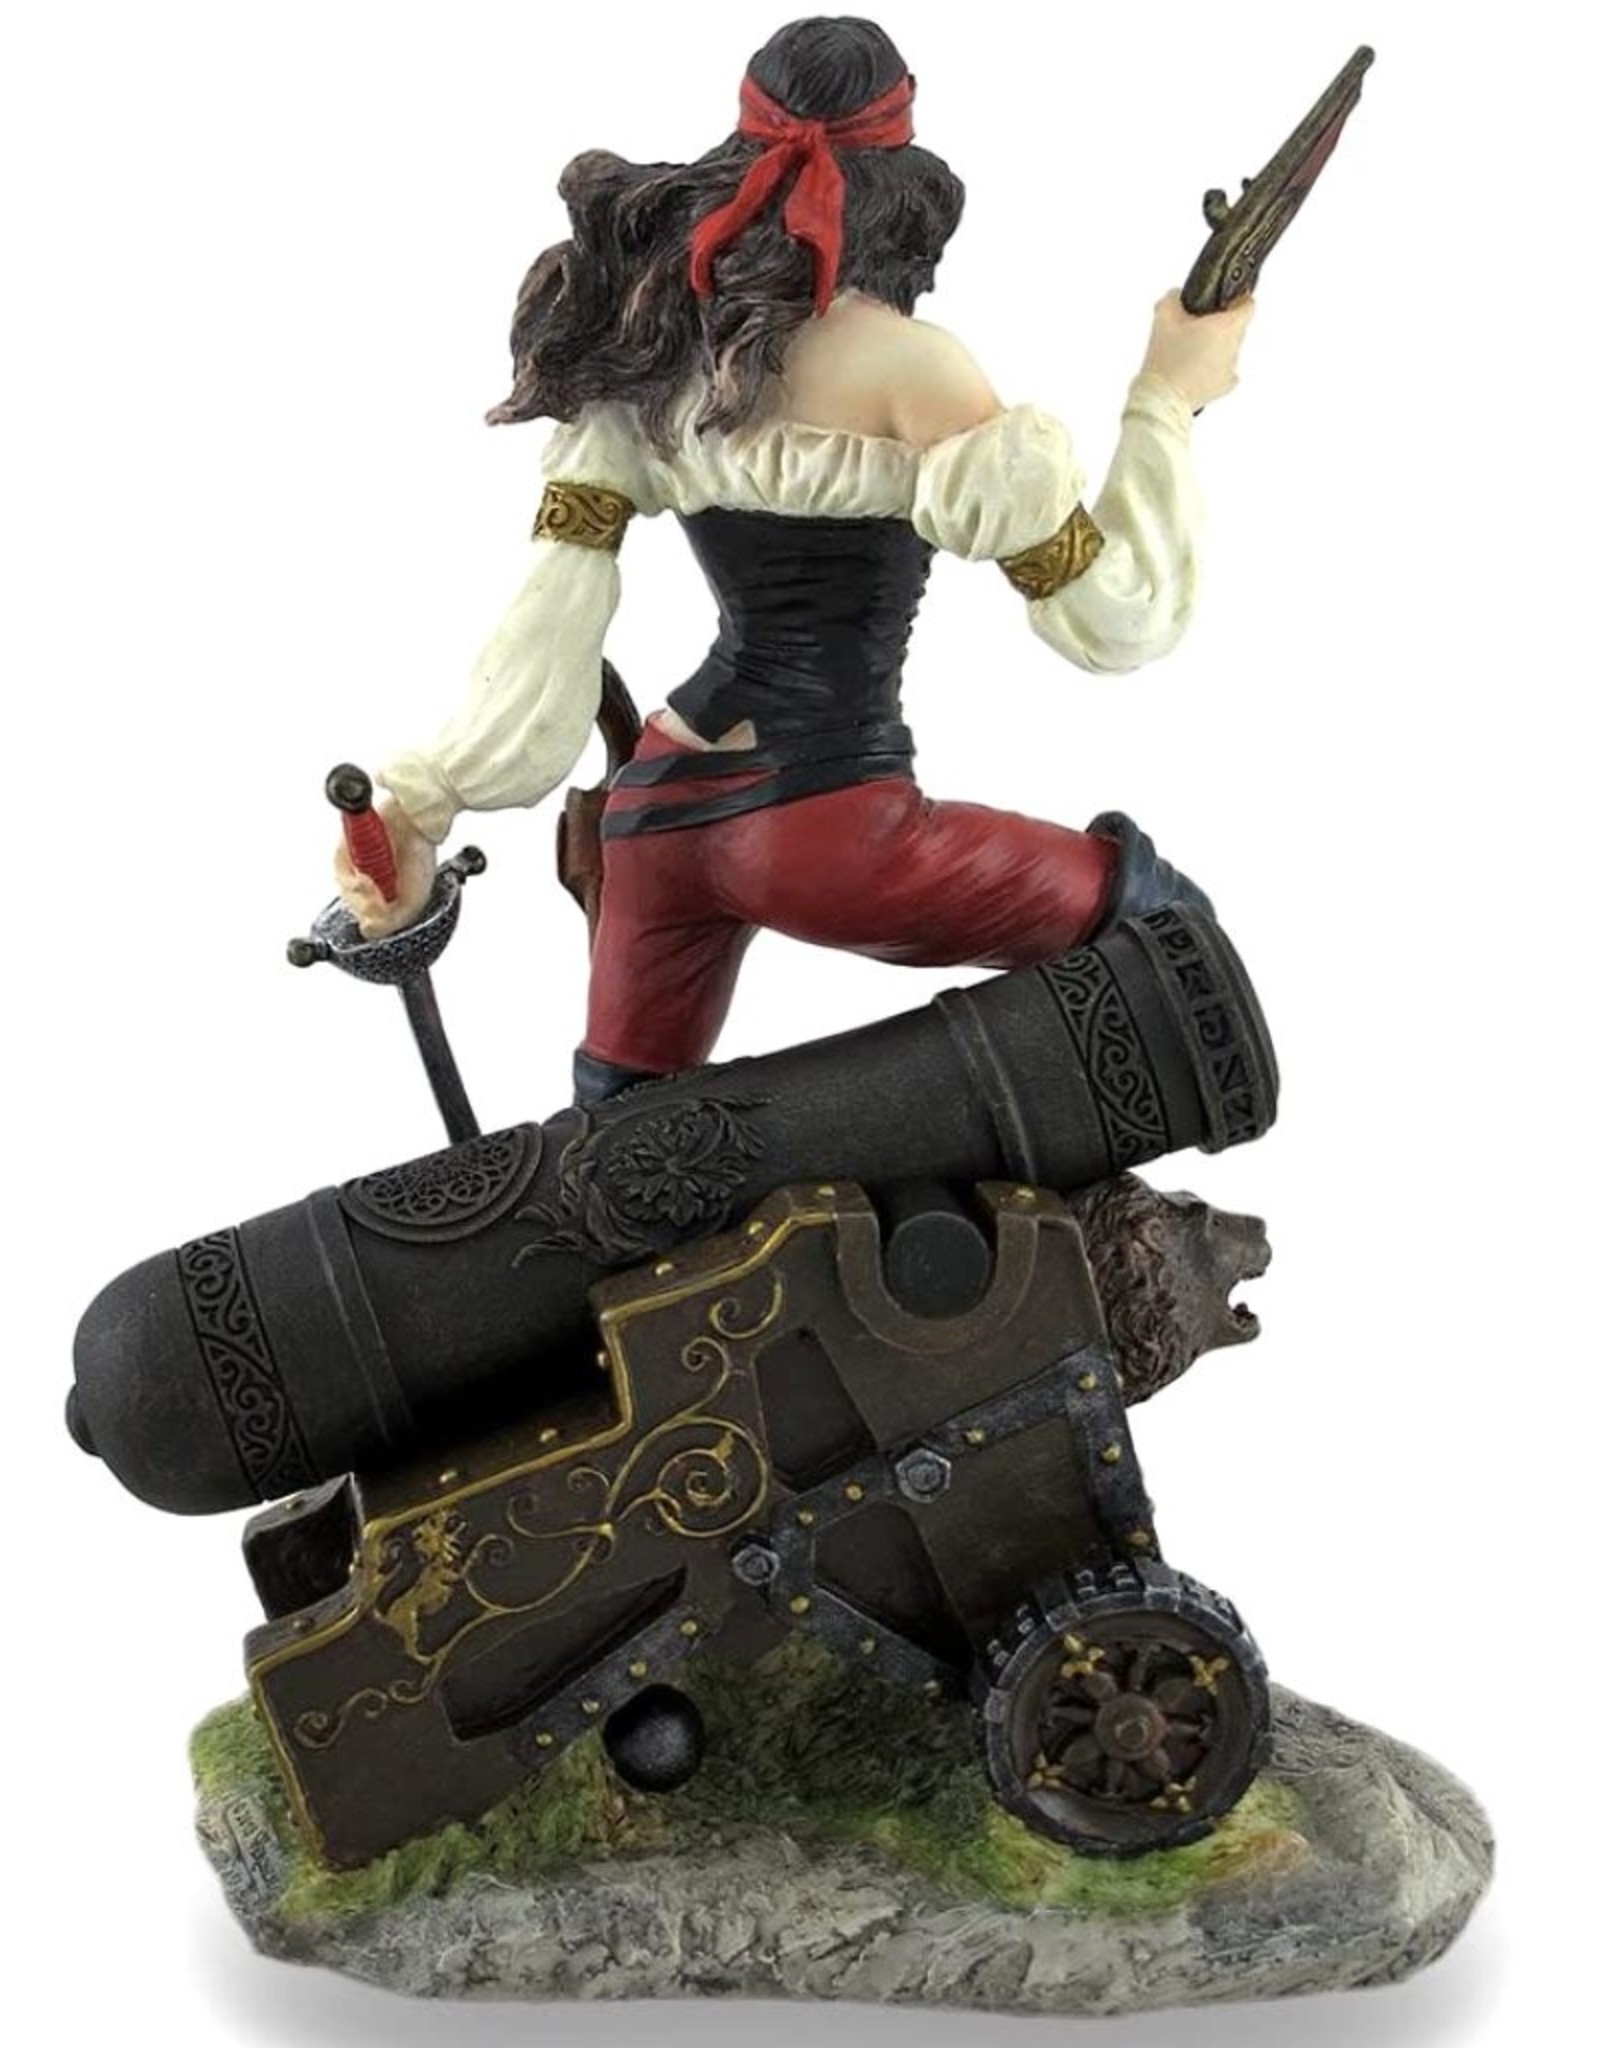 Veronese Design Giftware & Lifestyle - Female Pirate with Pistol and Sword figurine